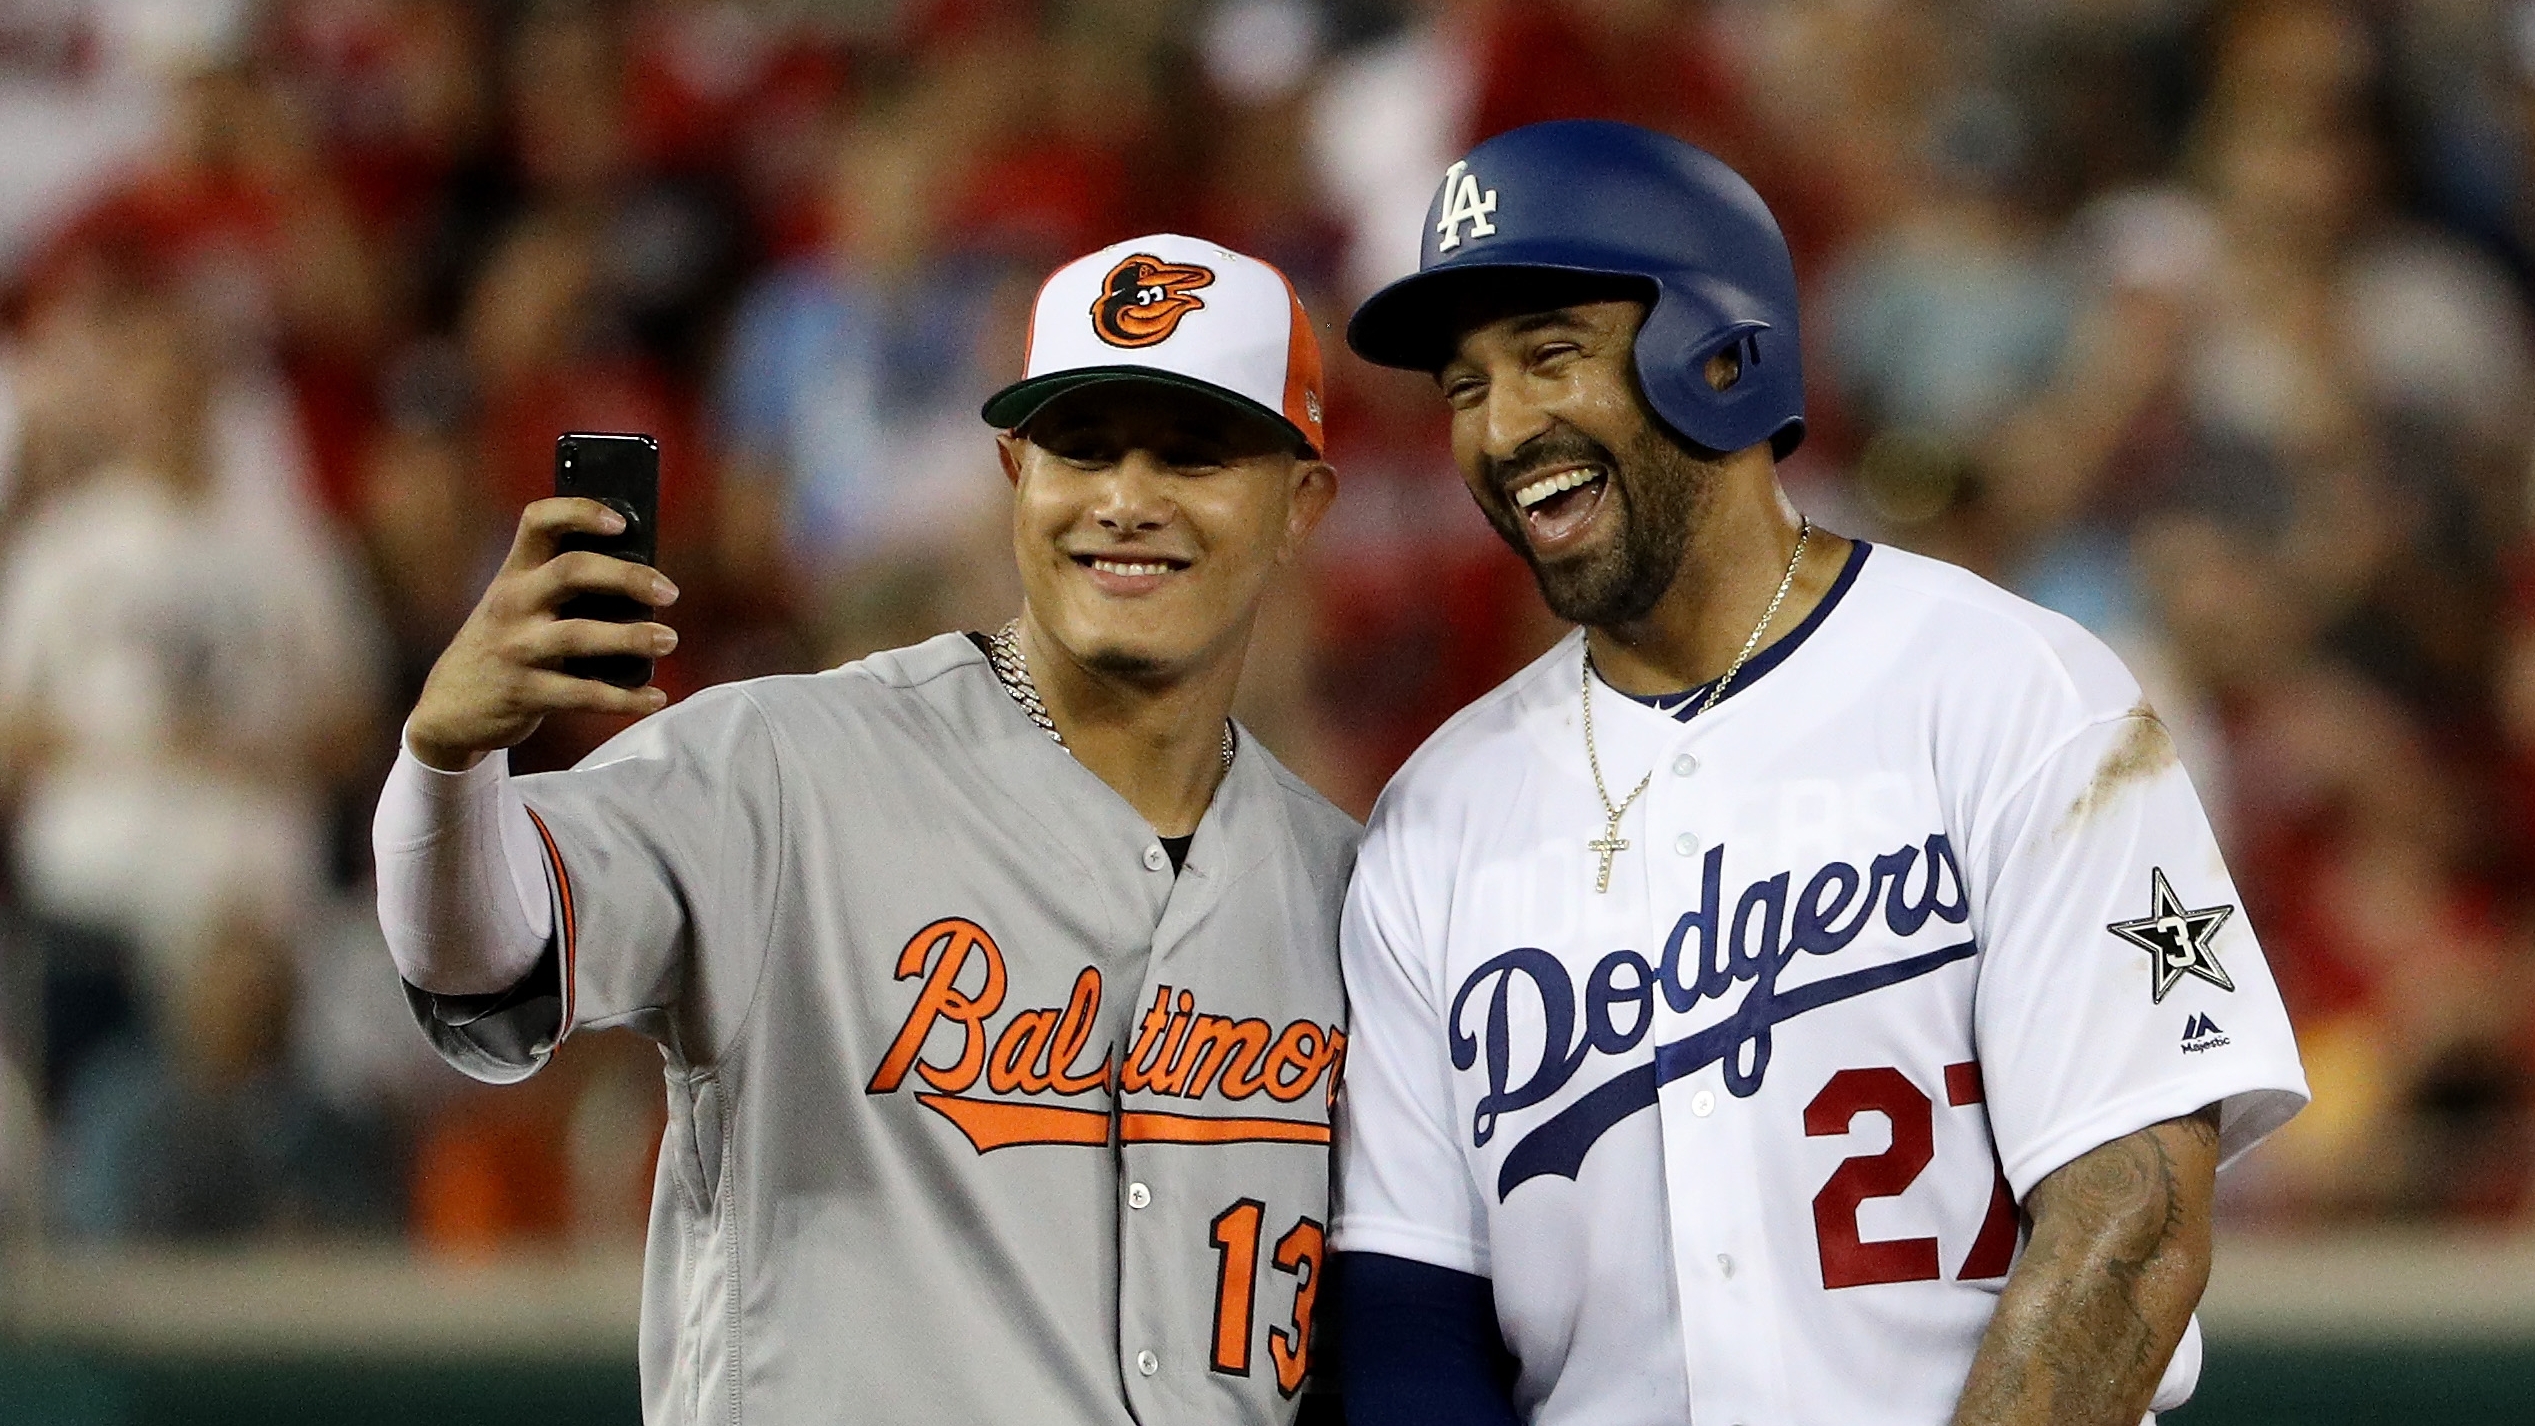 Orioles reset: The Manny Machado trade started Baltimore's rebuild 5 years  ago. Here are 5 moves from it paying off now.